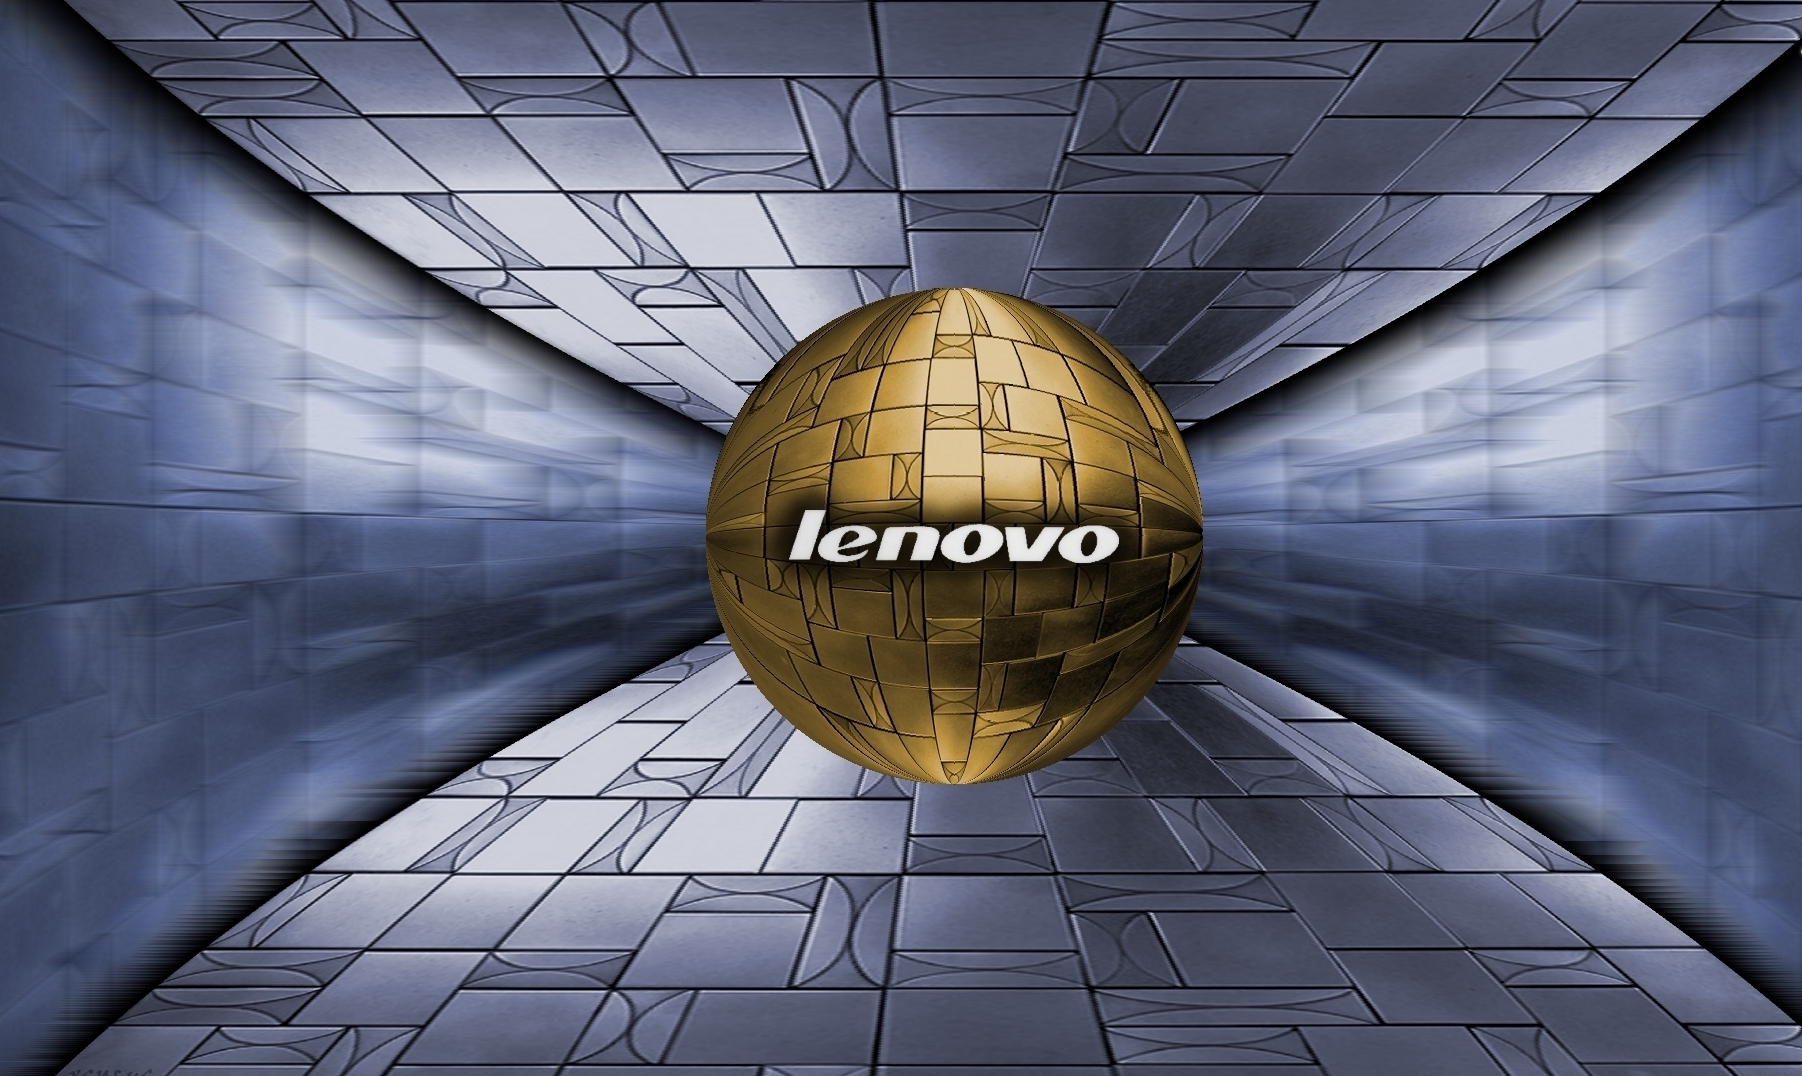 Lenovo Wallpapers/Backgrounds In HD